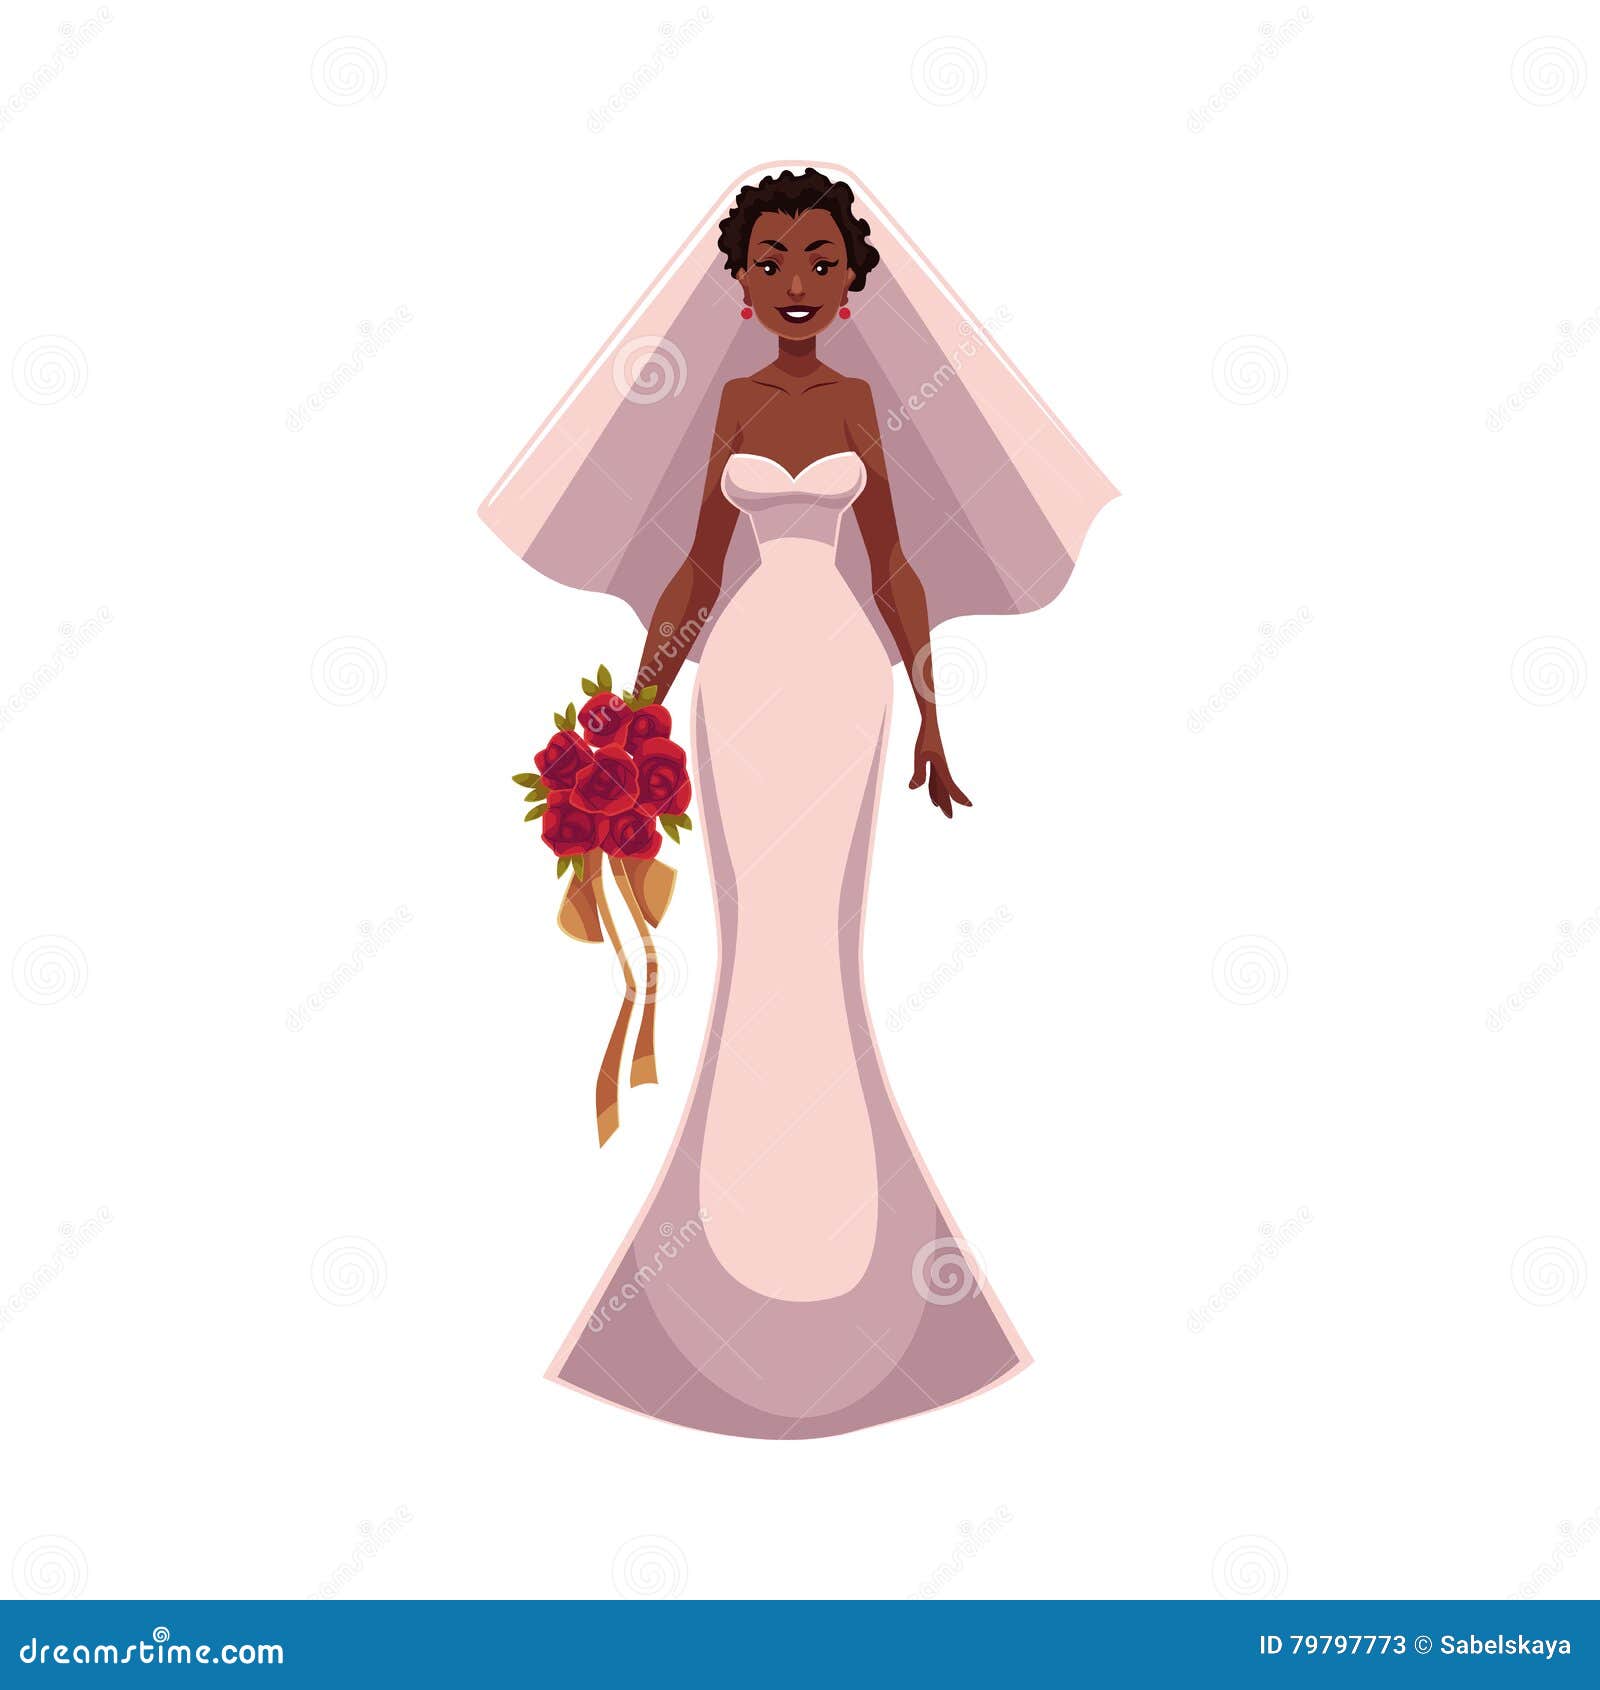 black woman clipart. Clipart of Beautiful elegant black woman in wedding gown wedding clipart